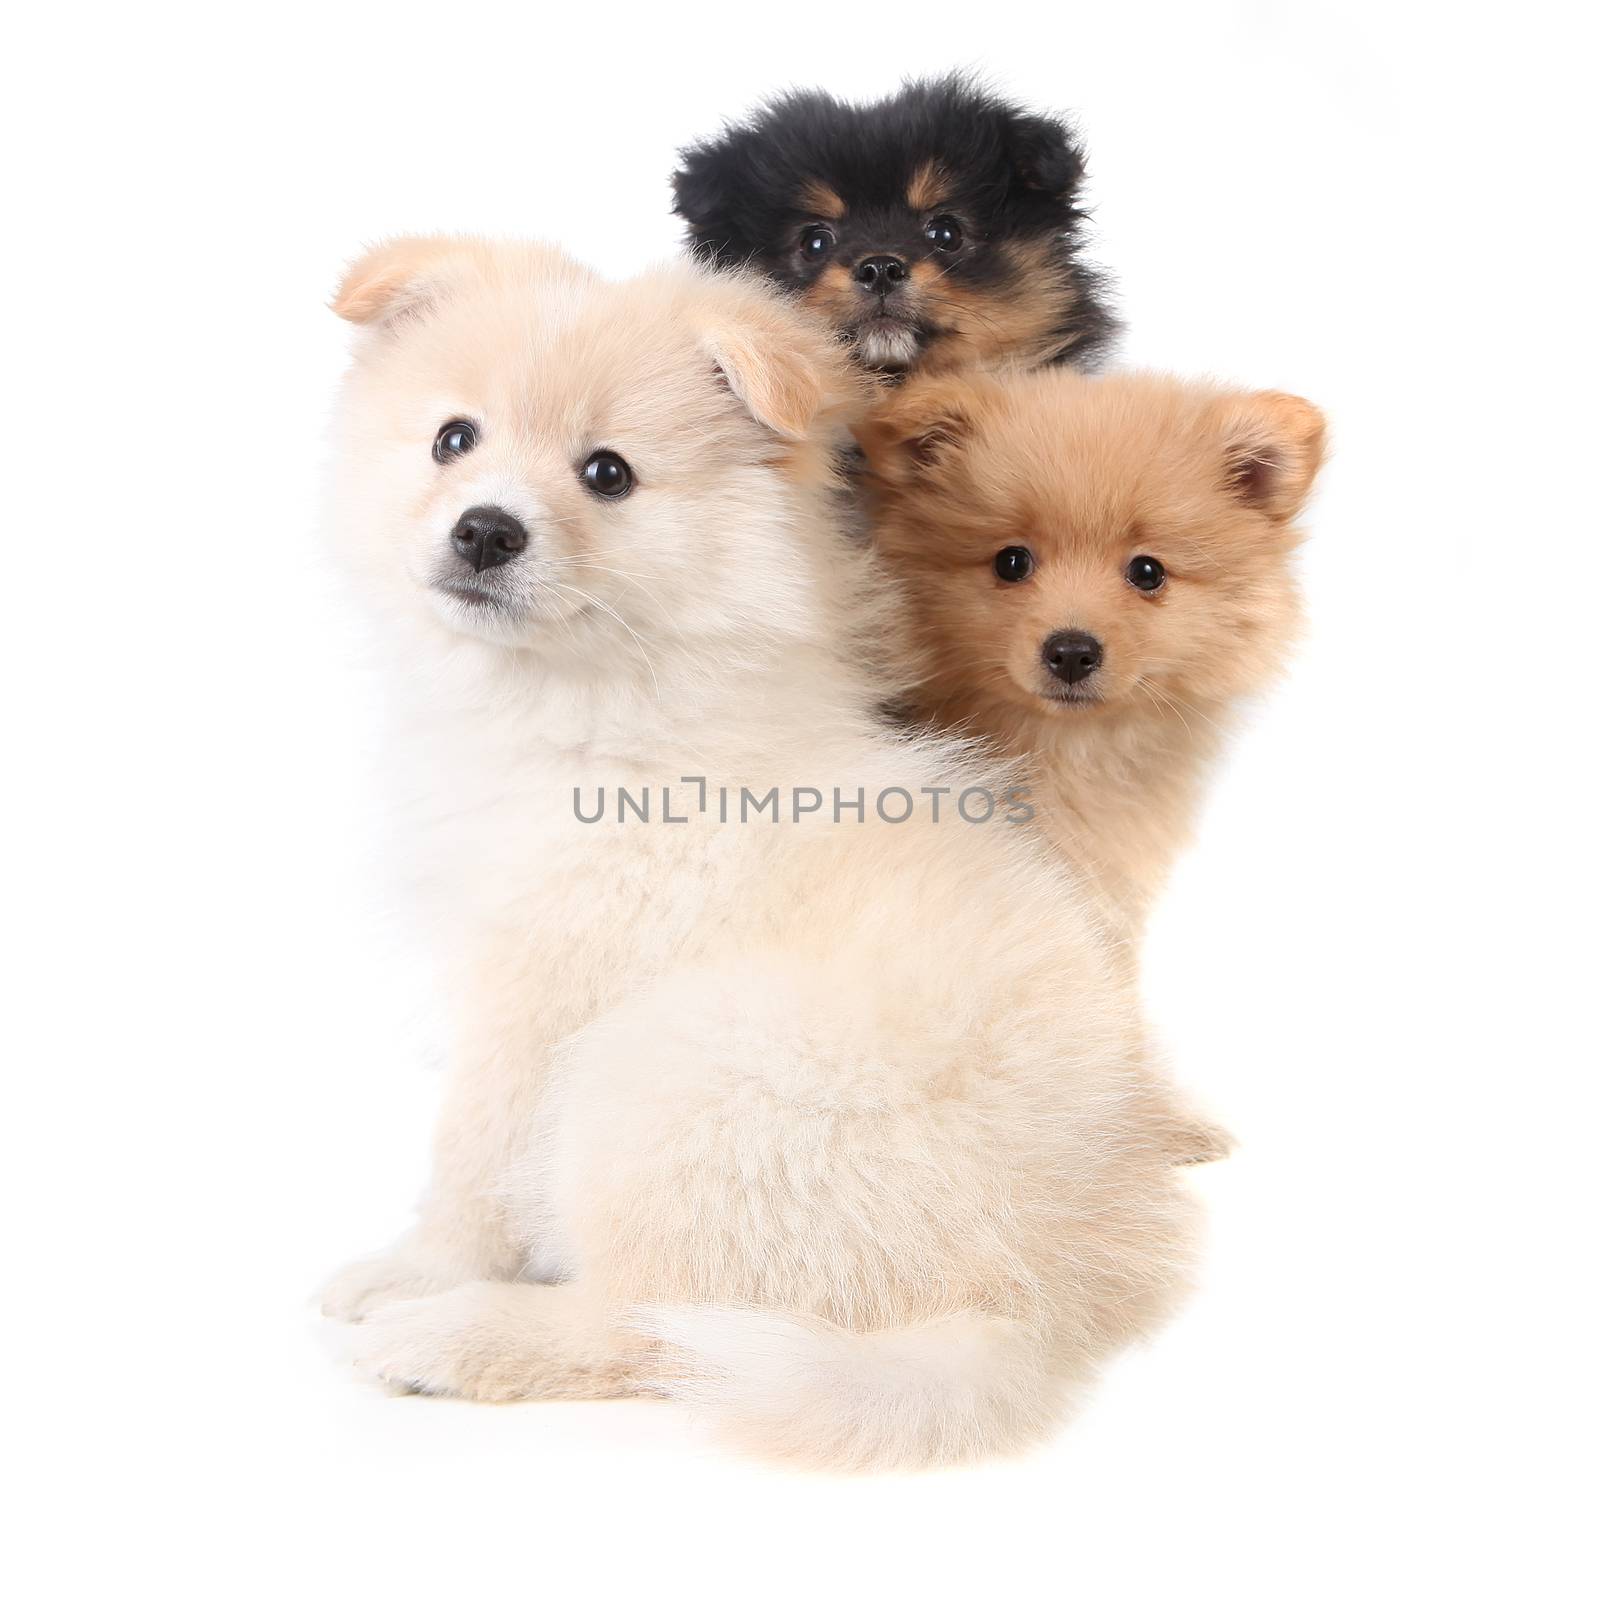 3 Pomeranian Puppies Sitting Together on White Background by tobkatrina